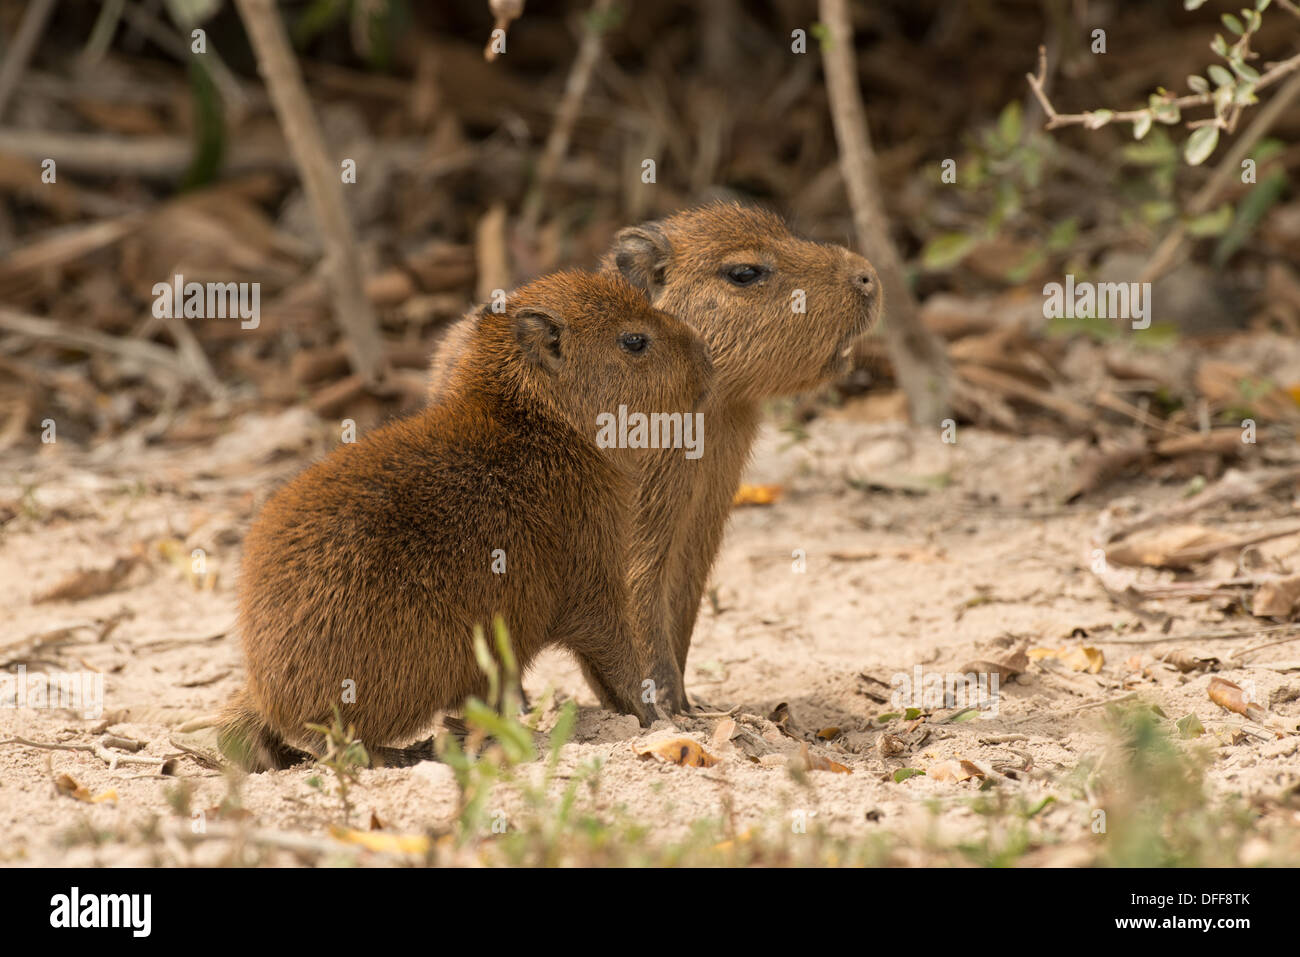 Stock photo of two baby capybaras sitting together, Pantanal, Brazil. Stock Photo